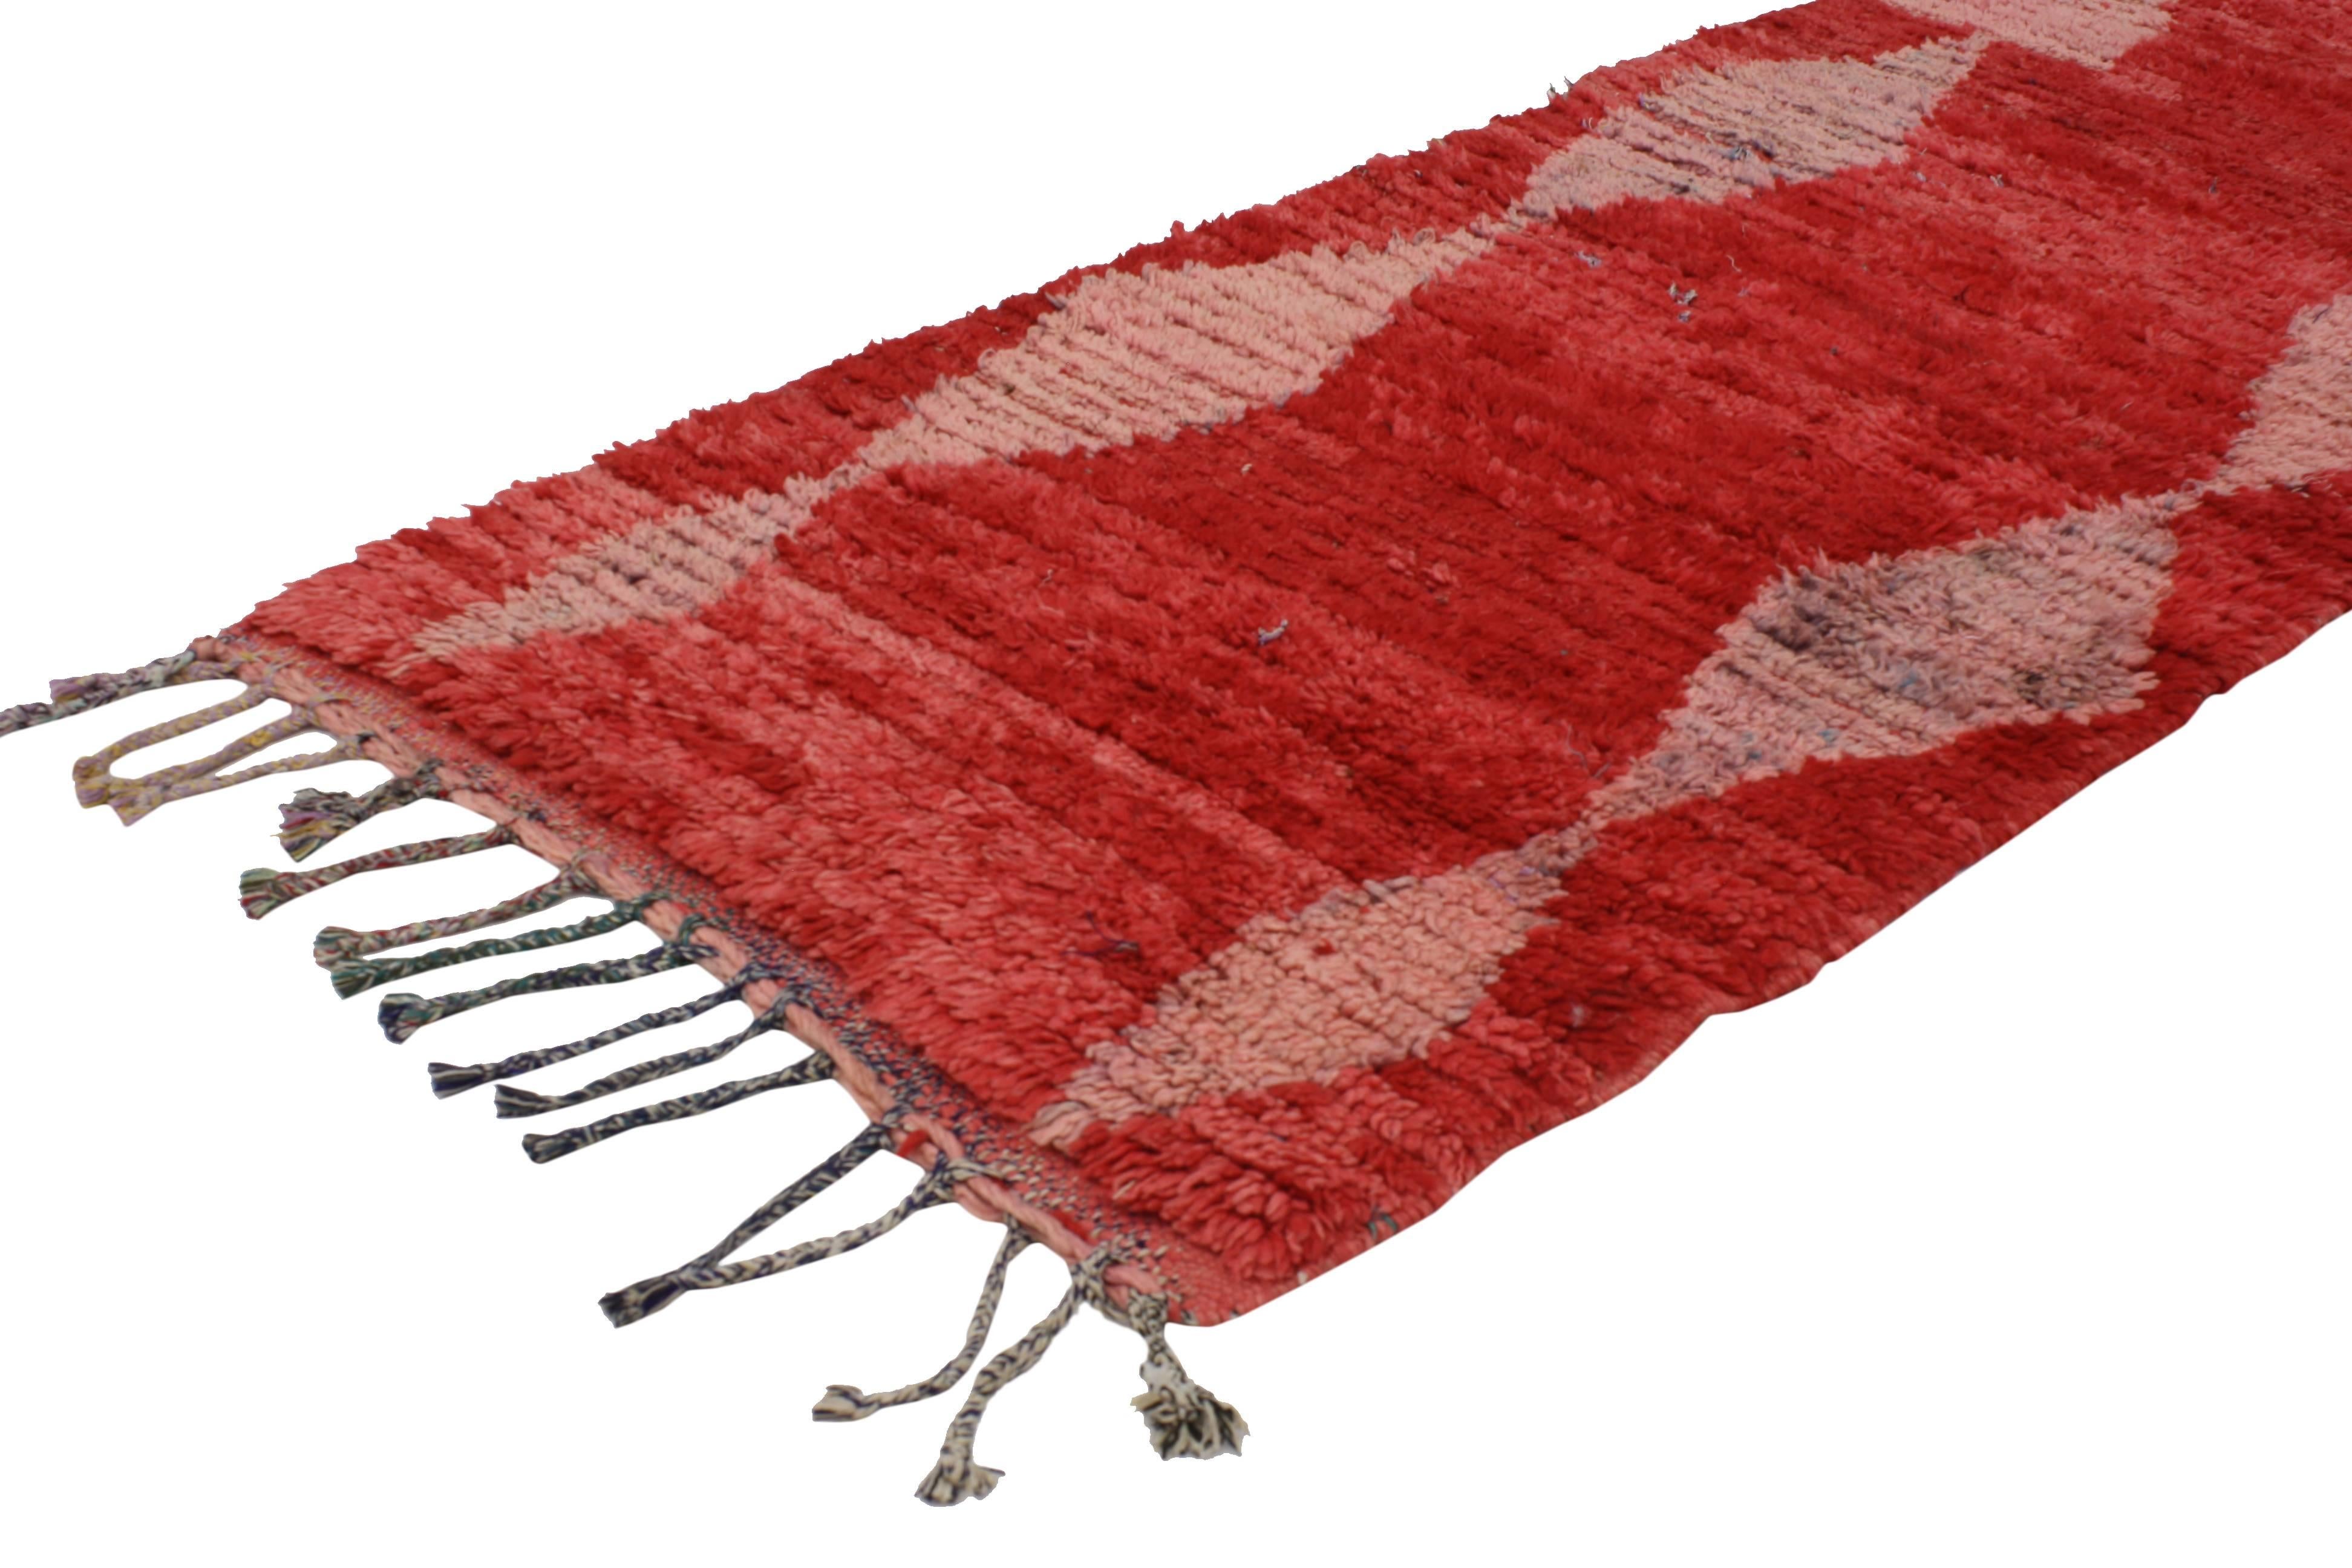 With the dramatic red color and Mid-Century Modern style, this vintage Berber Moroccan rug is not for the timid. Rendered in red, pink, beige, baby blue and lavender. Features two rows of stacked diamonds along the vertical side. The all-over